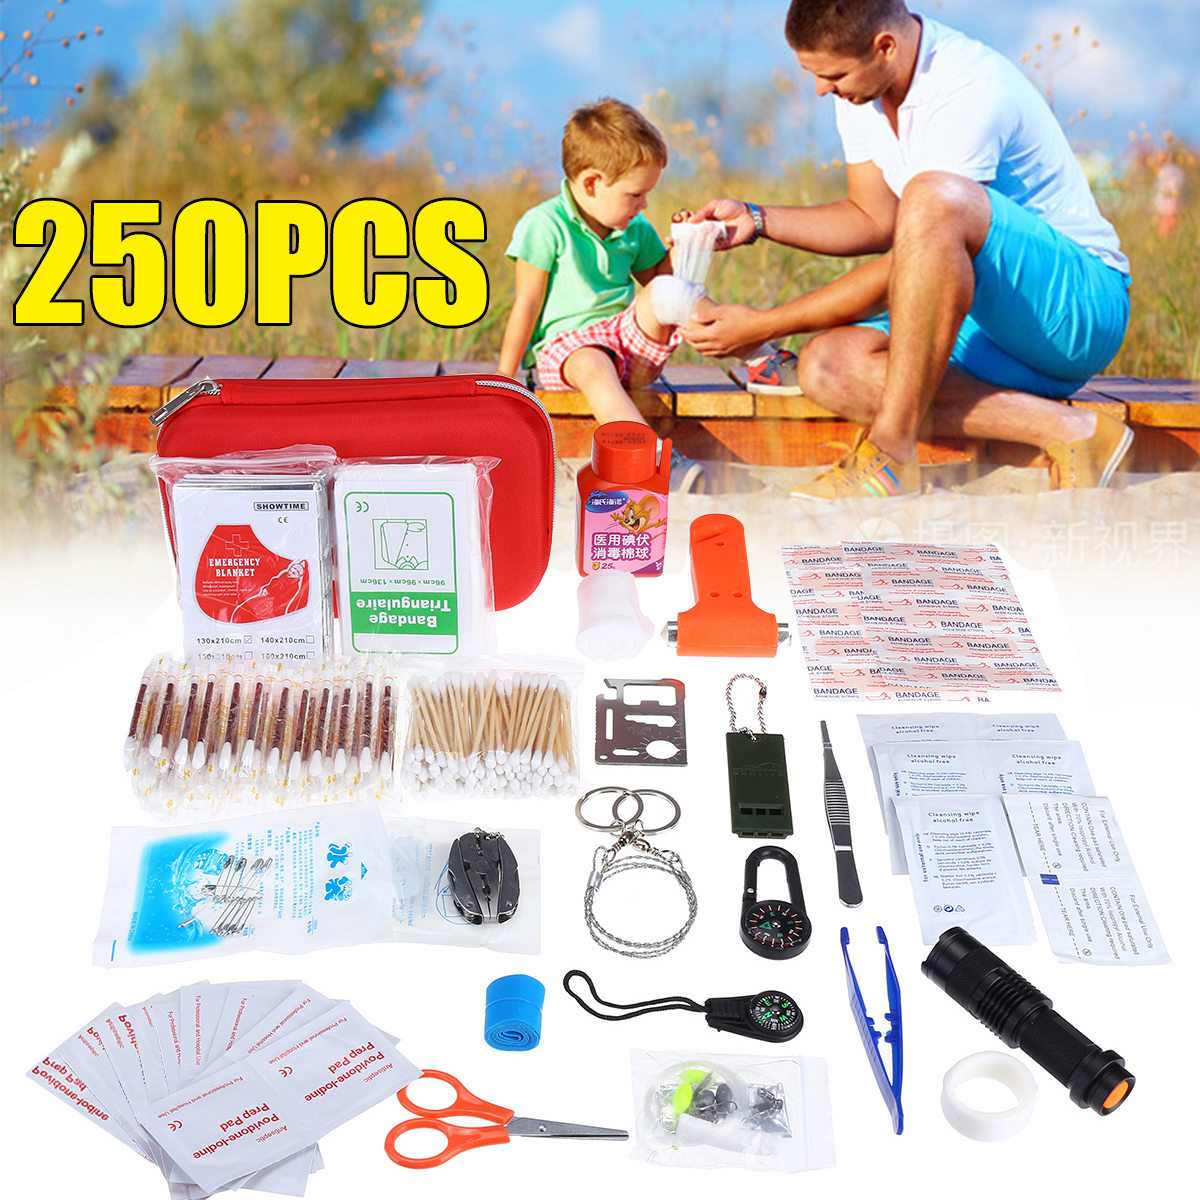 250Pcs-First-Aid-Emergency-SOS-Survival-Kit-Bag-Gear-For-Travel-Camping-Outdoor-Home-1734077-1